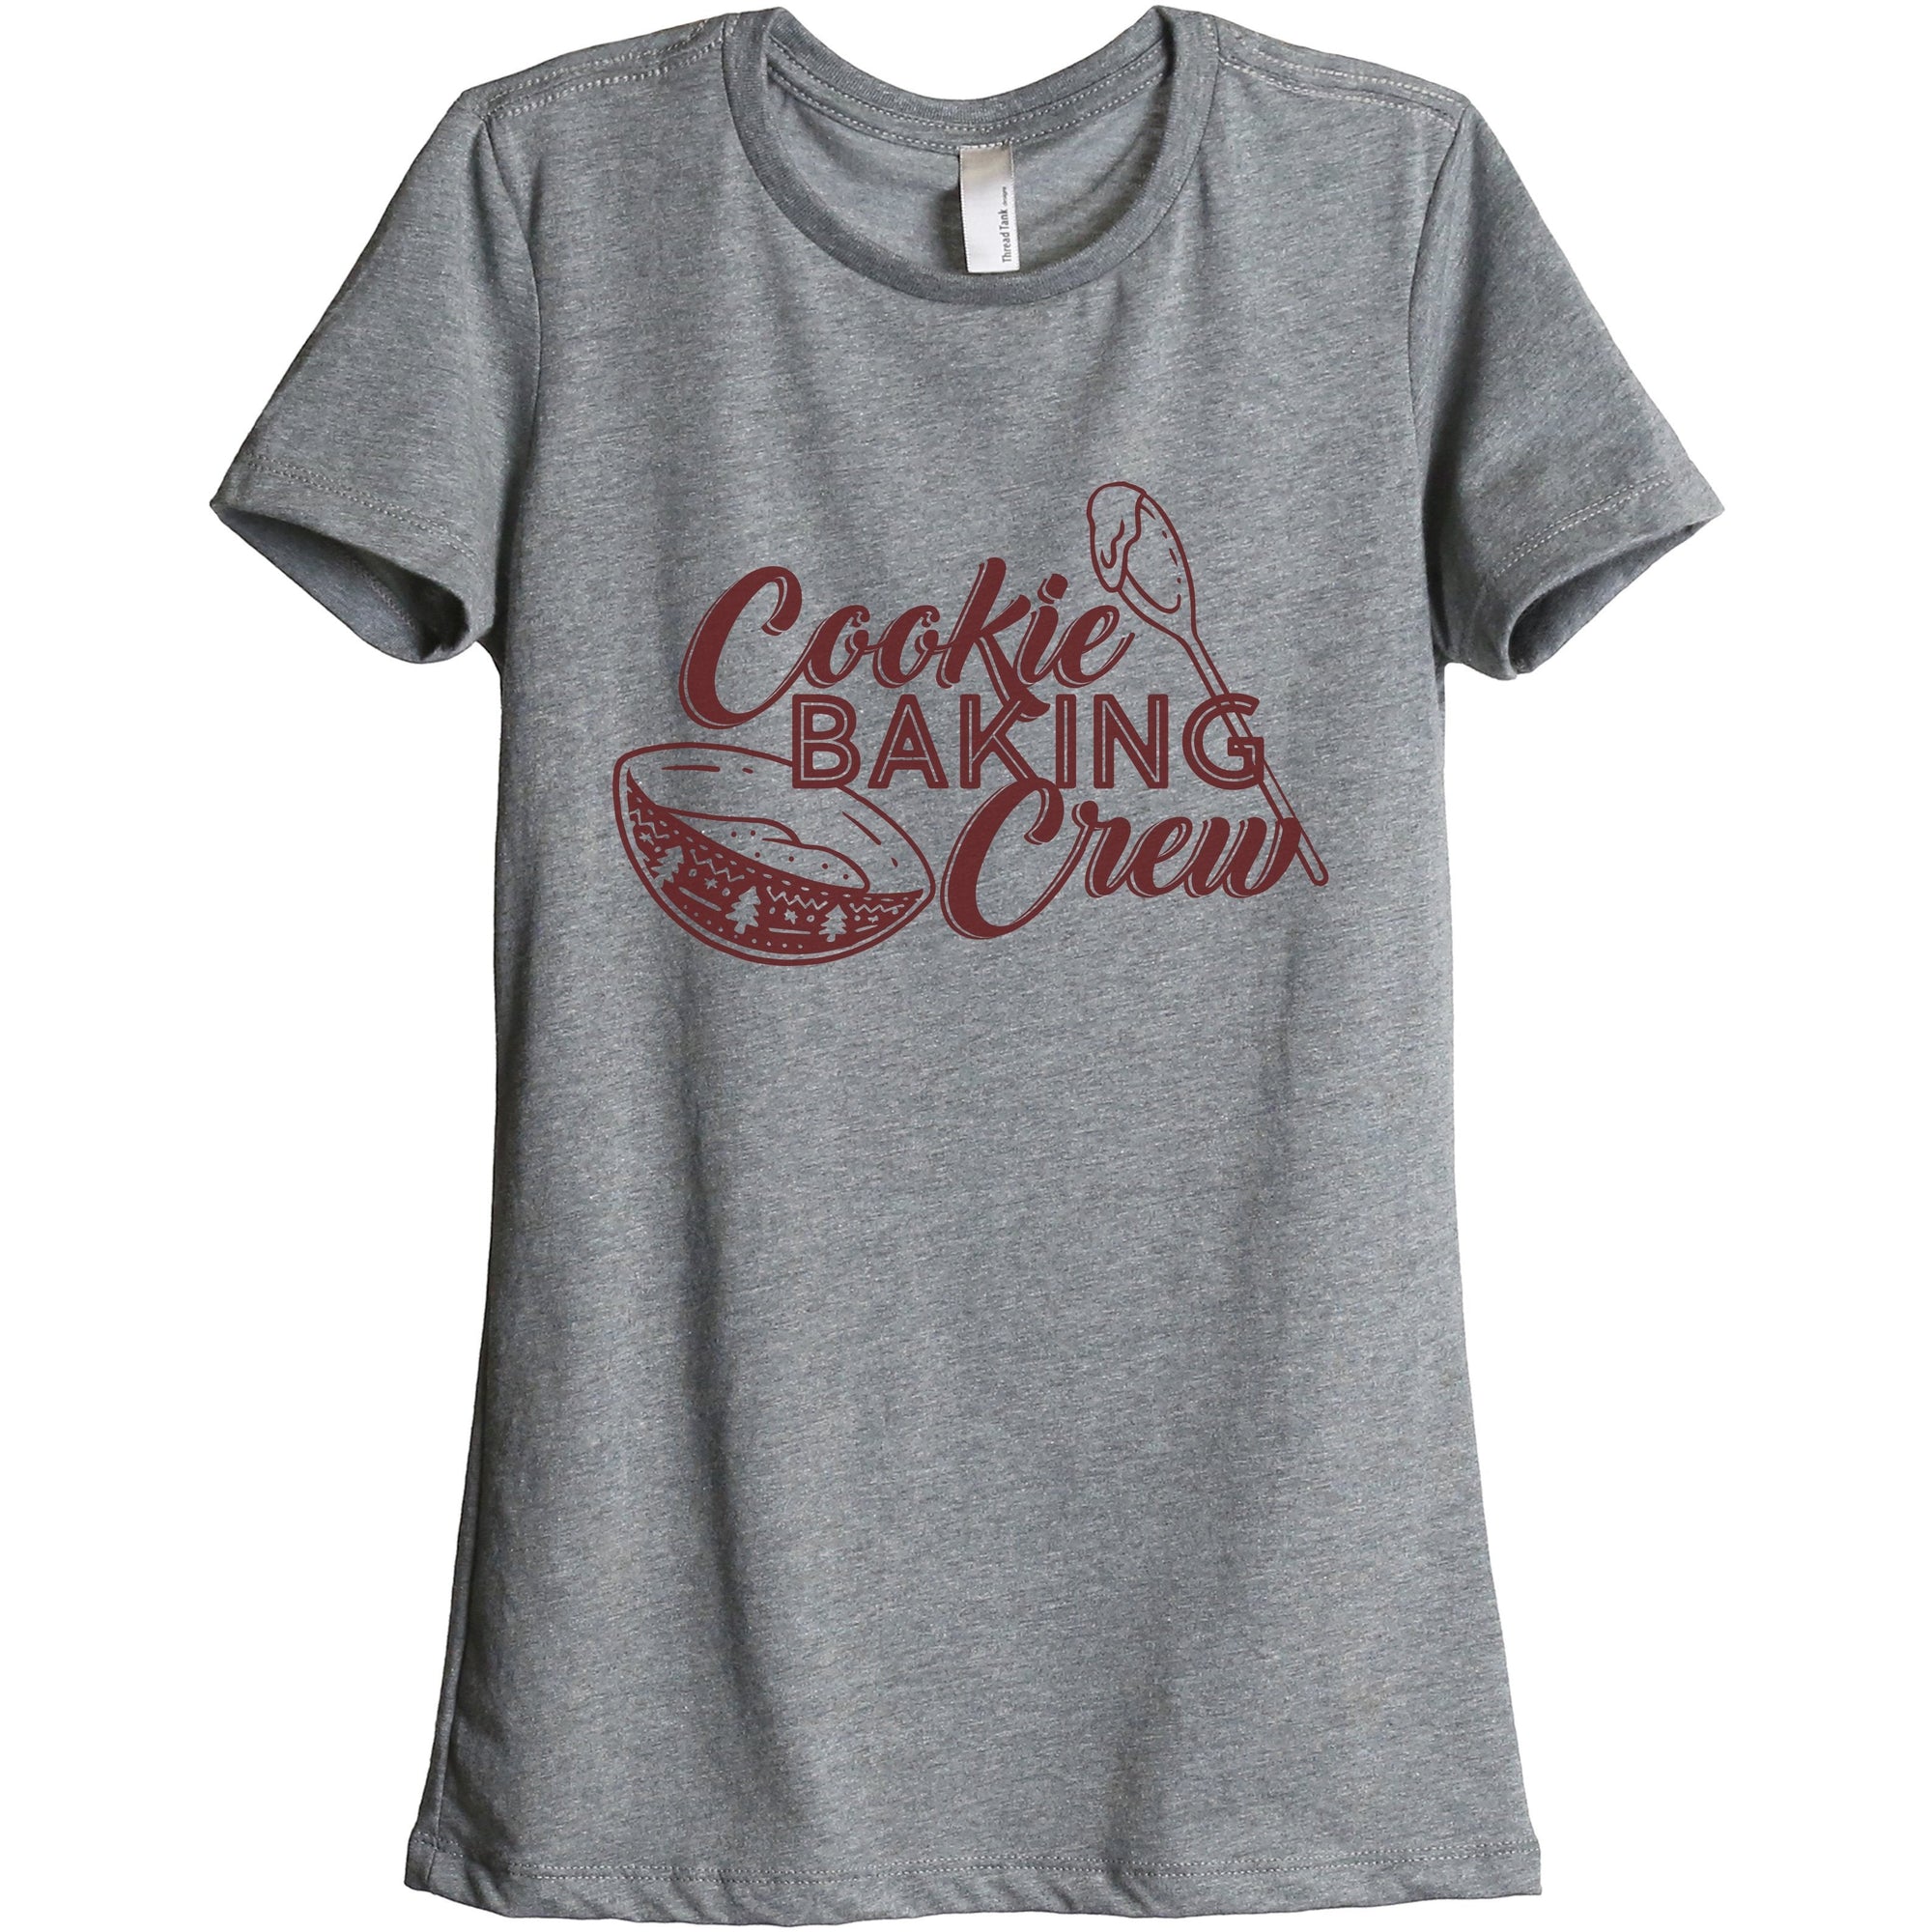 Cookie Baking Crew Women's Relaxed Crewneck T-Shirt Top Tee Vintage White Scarlet Model